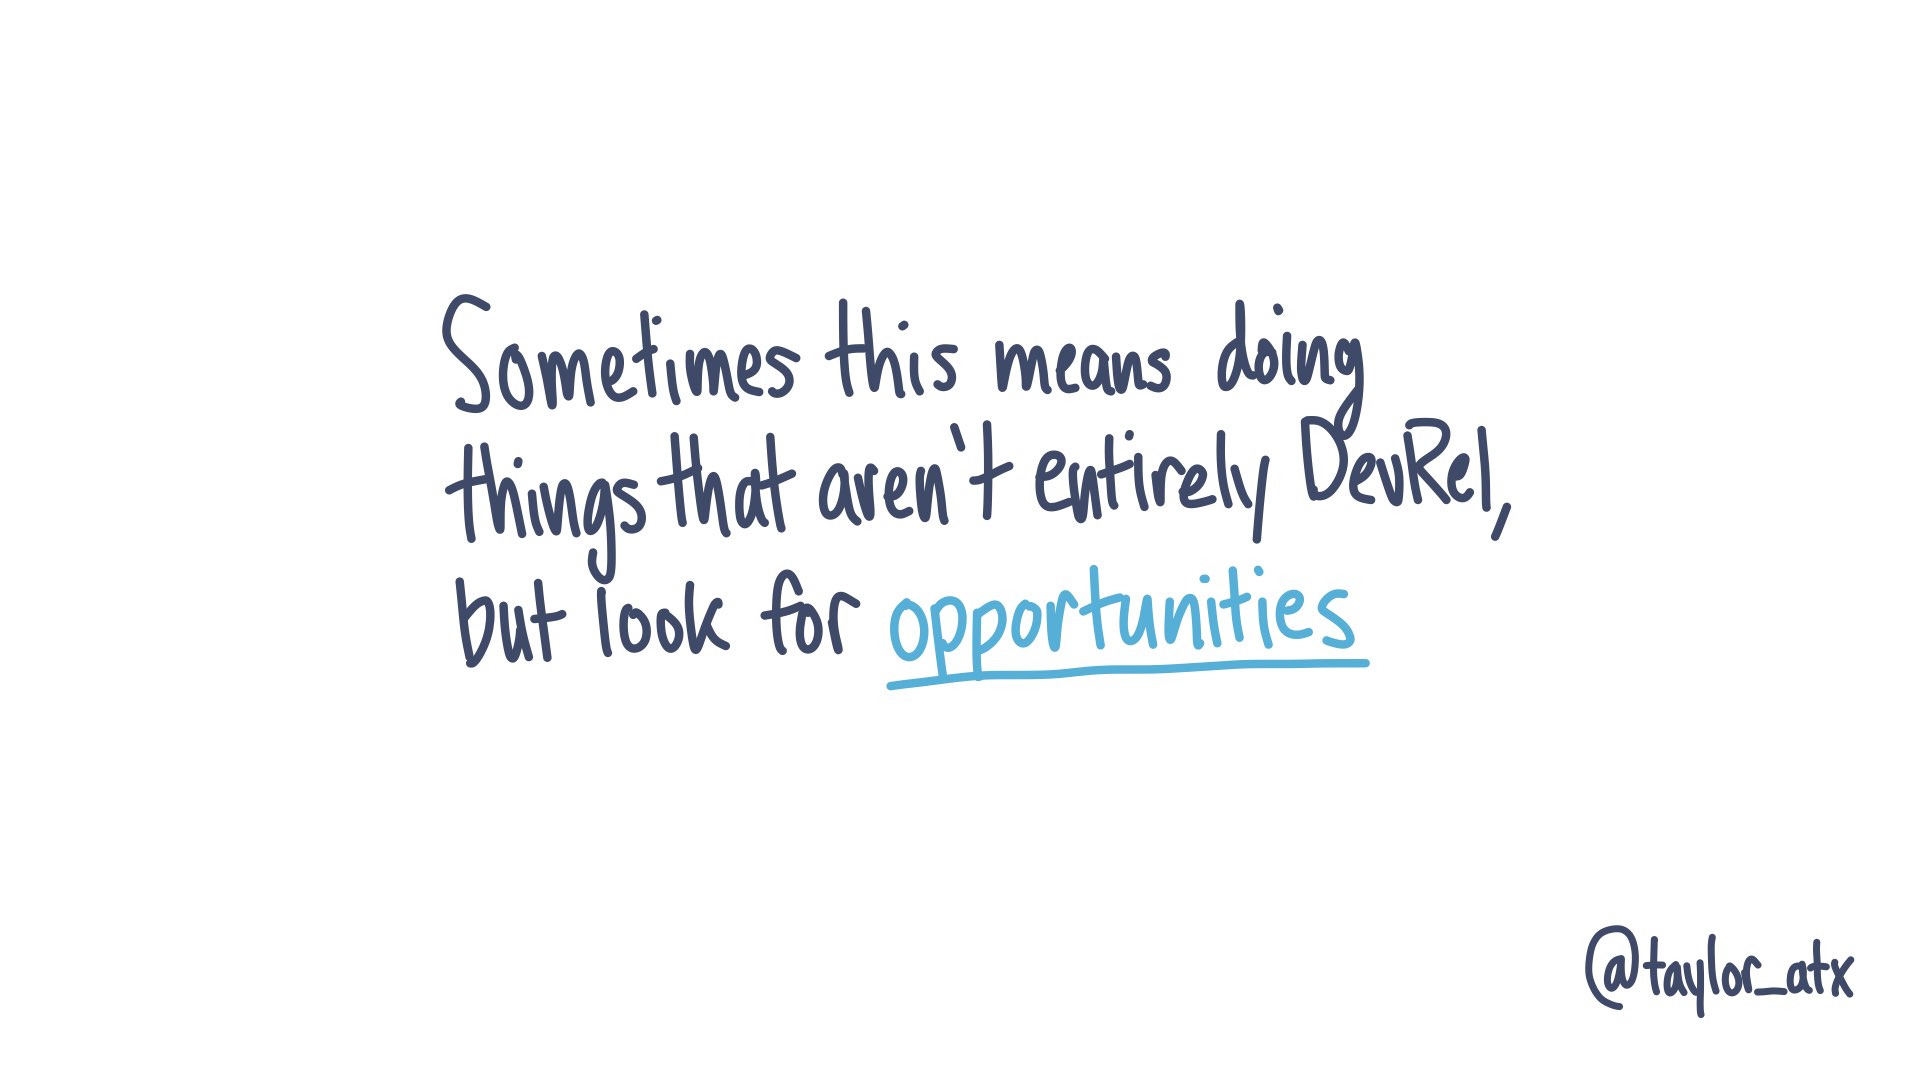 Sometimes this means doing things that aren't entirely DevRel, but look for opportunities